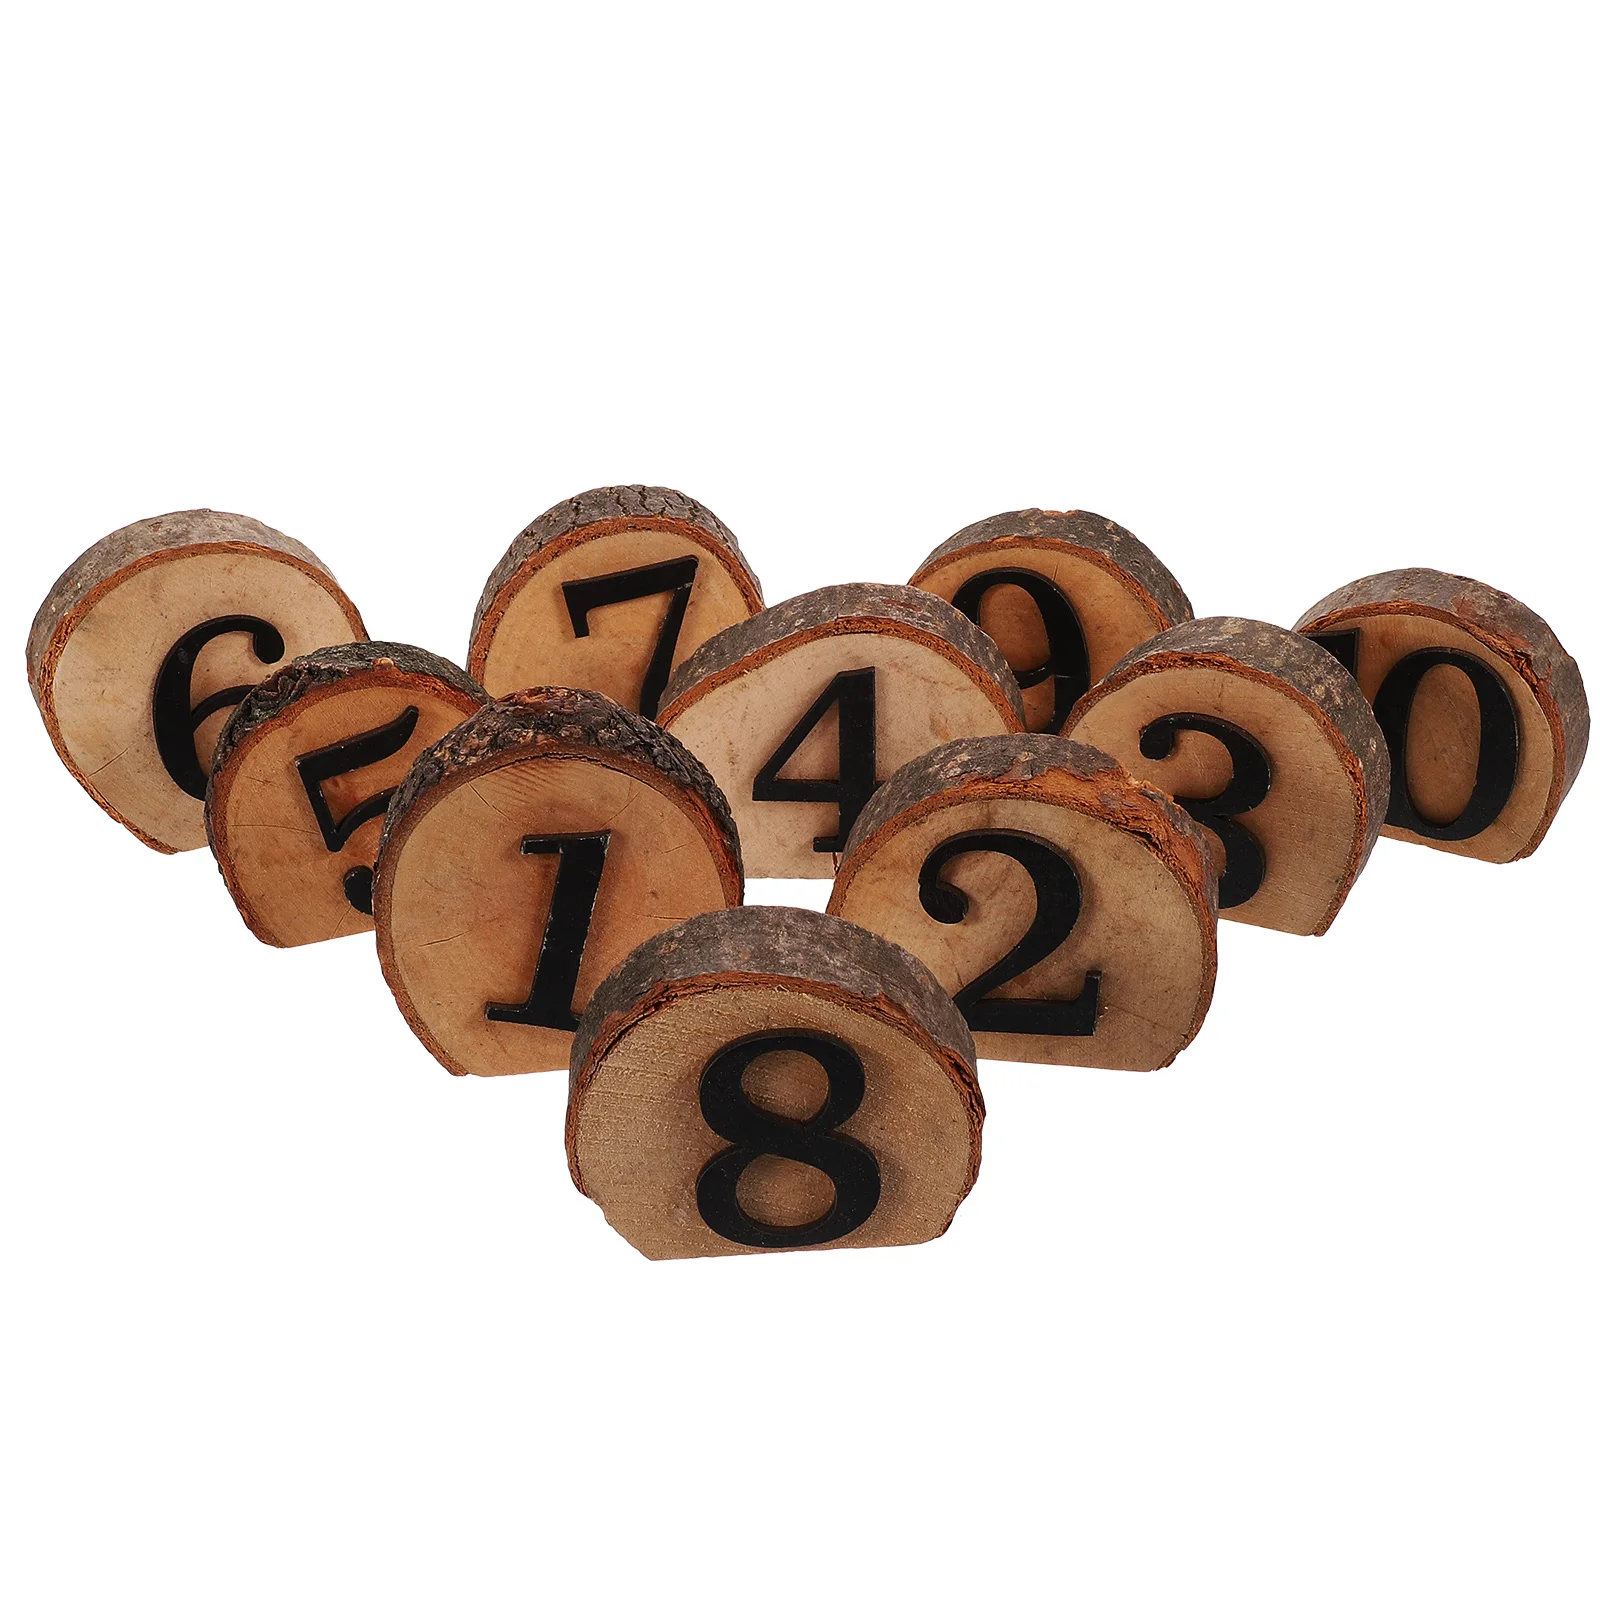 

Decor Table Number Signs Wood Numbers Seats Dining Restaurant Wedding Supplies Boxwood Festival Reception Decors Birthday